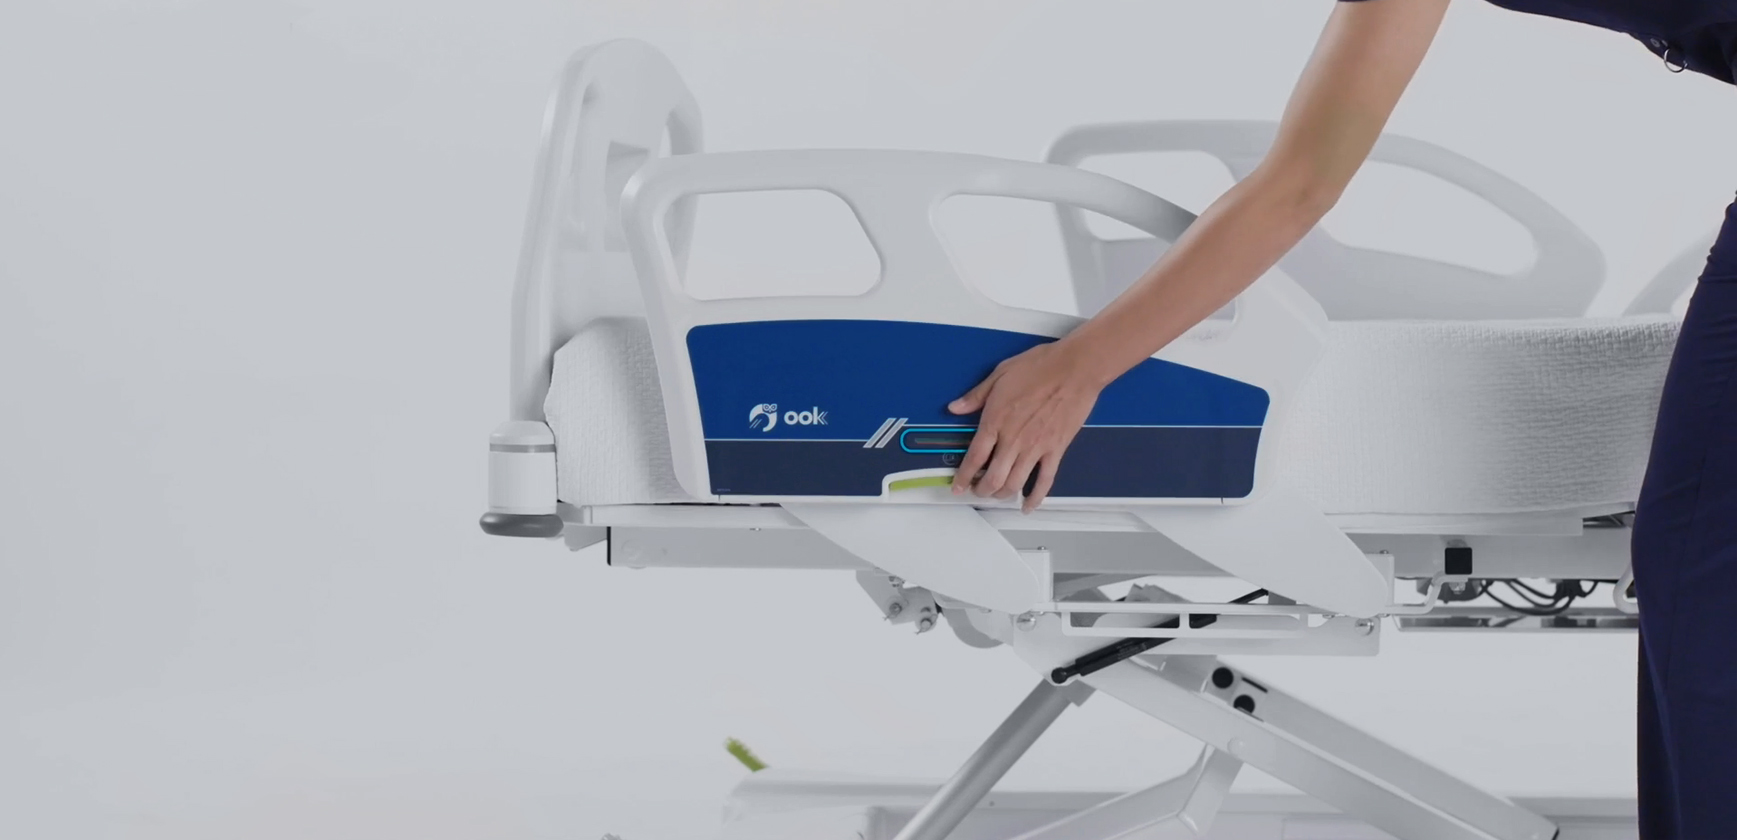 ook snow hospital bed promotional video - Umano Medical - Canada